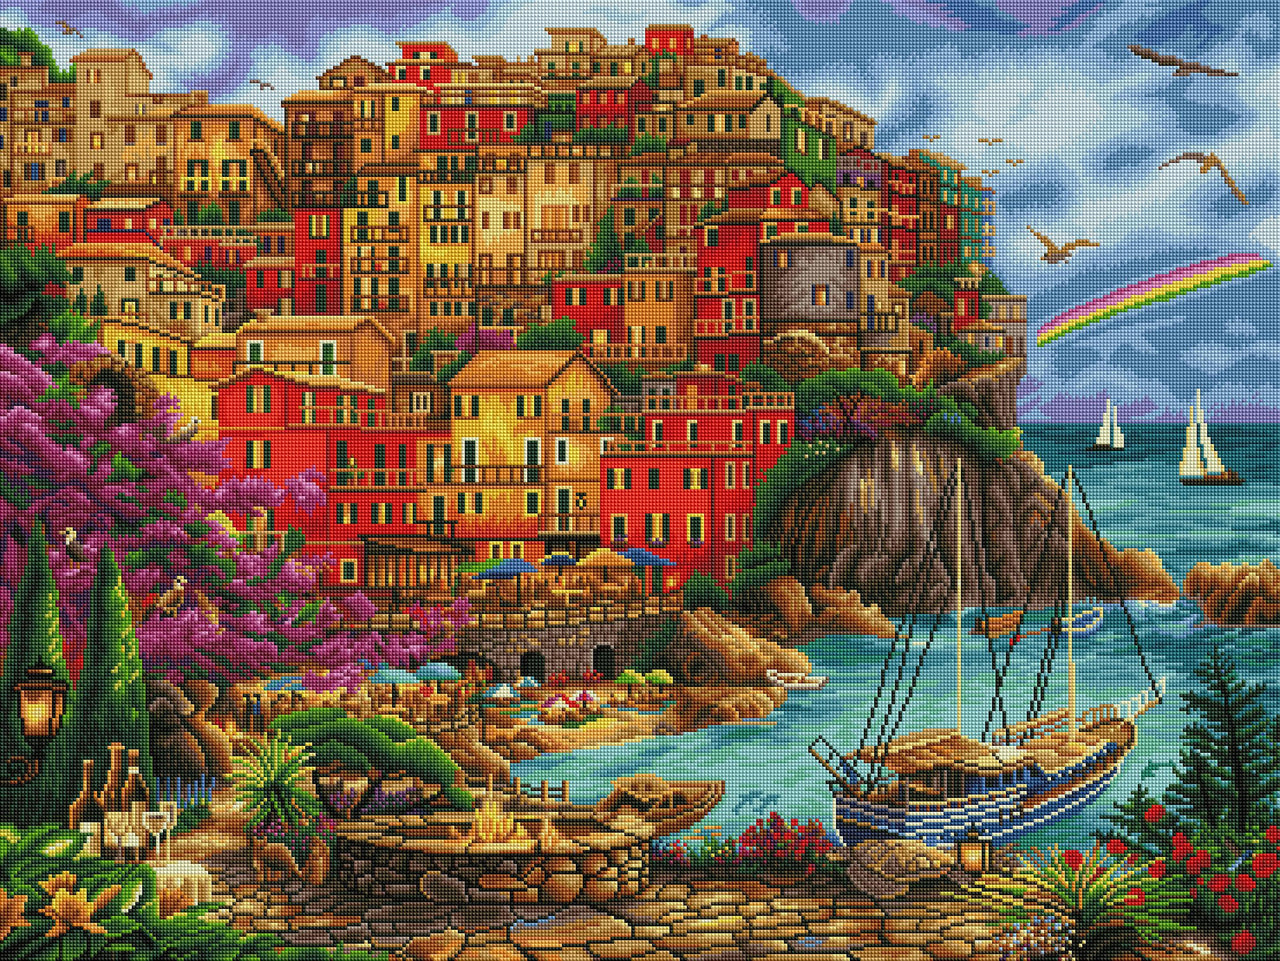 Diamond Painting A Beautiful Day at Cinque Terre 36.6" x 27.6″ (93cm x 70cm) / Square with 57 Colors including 2 ABs / 102,211